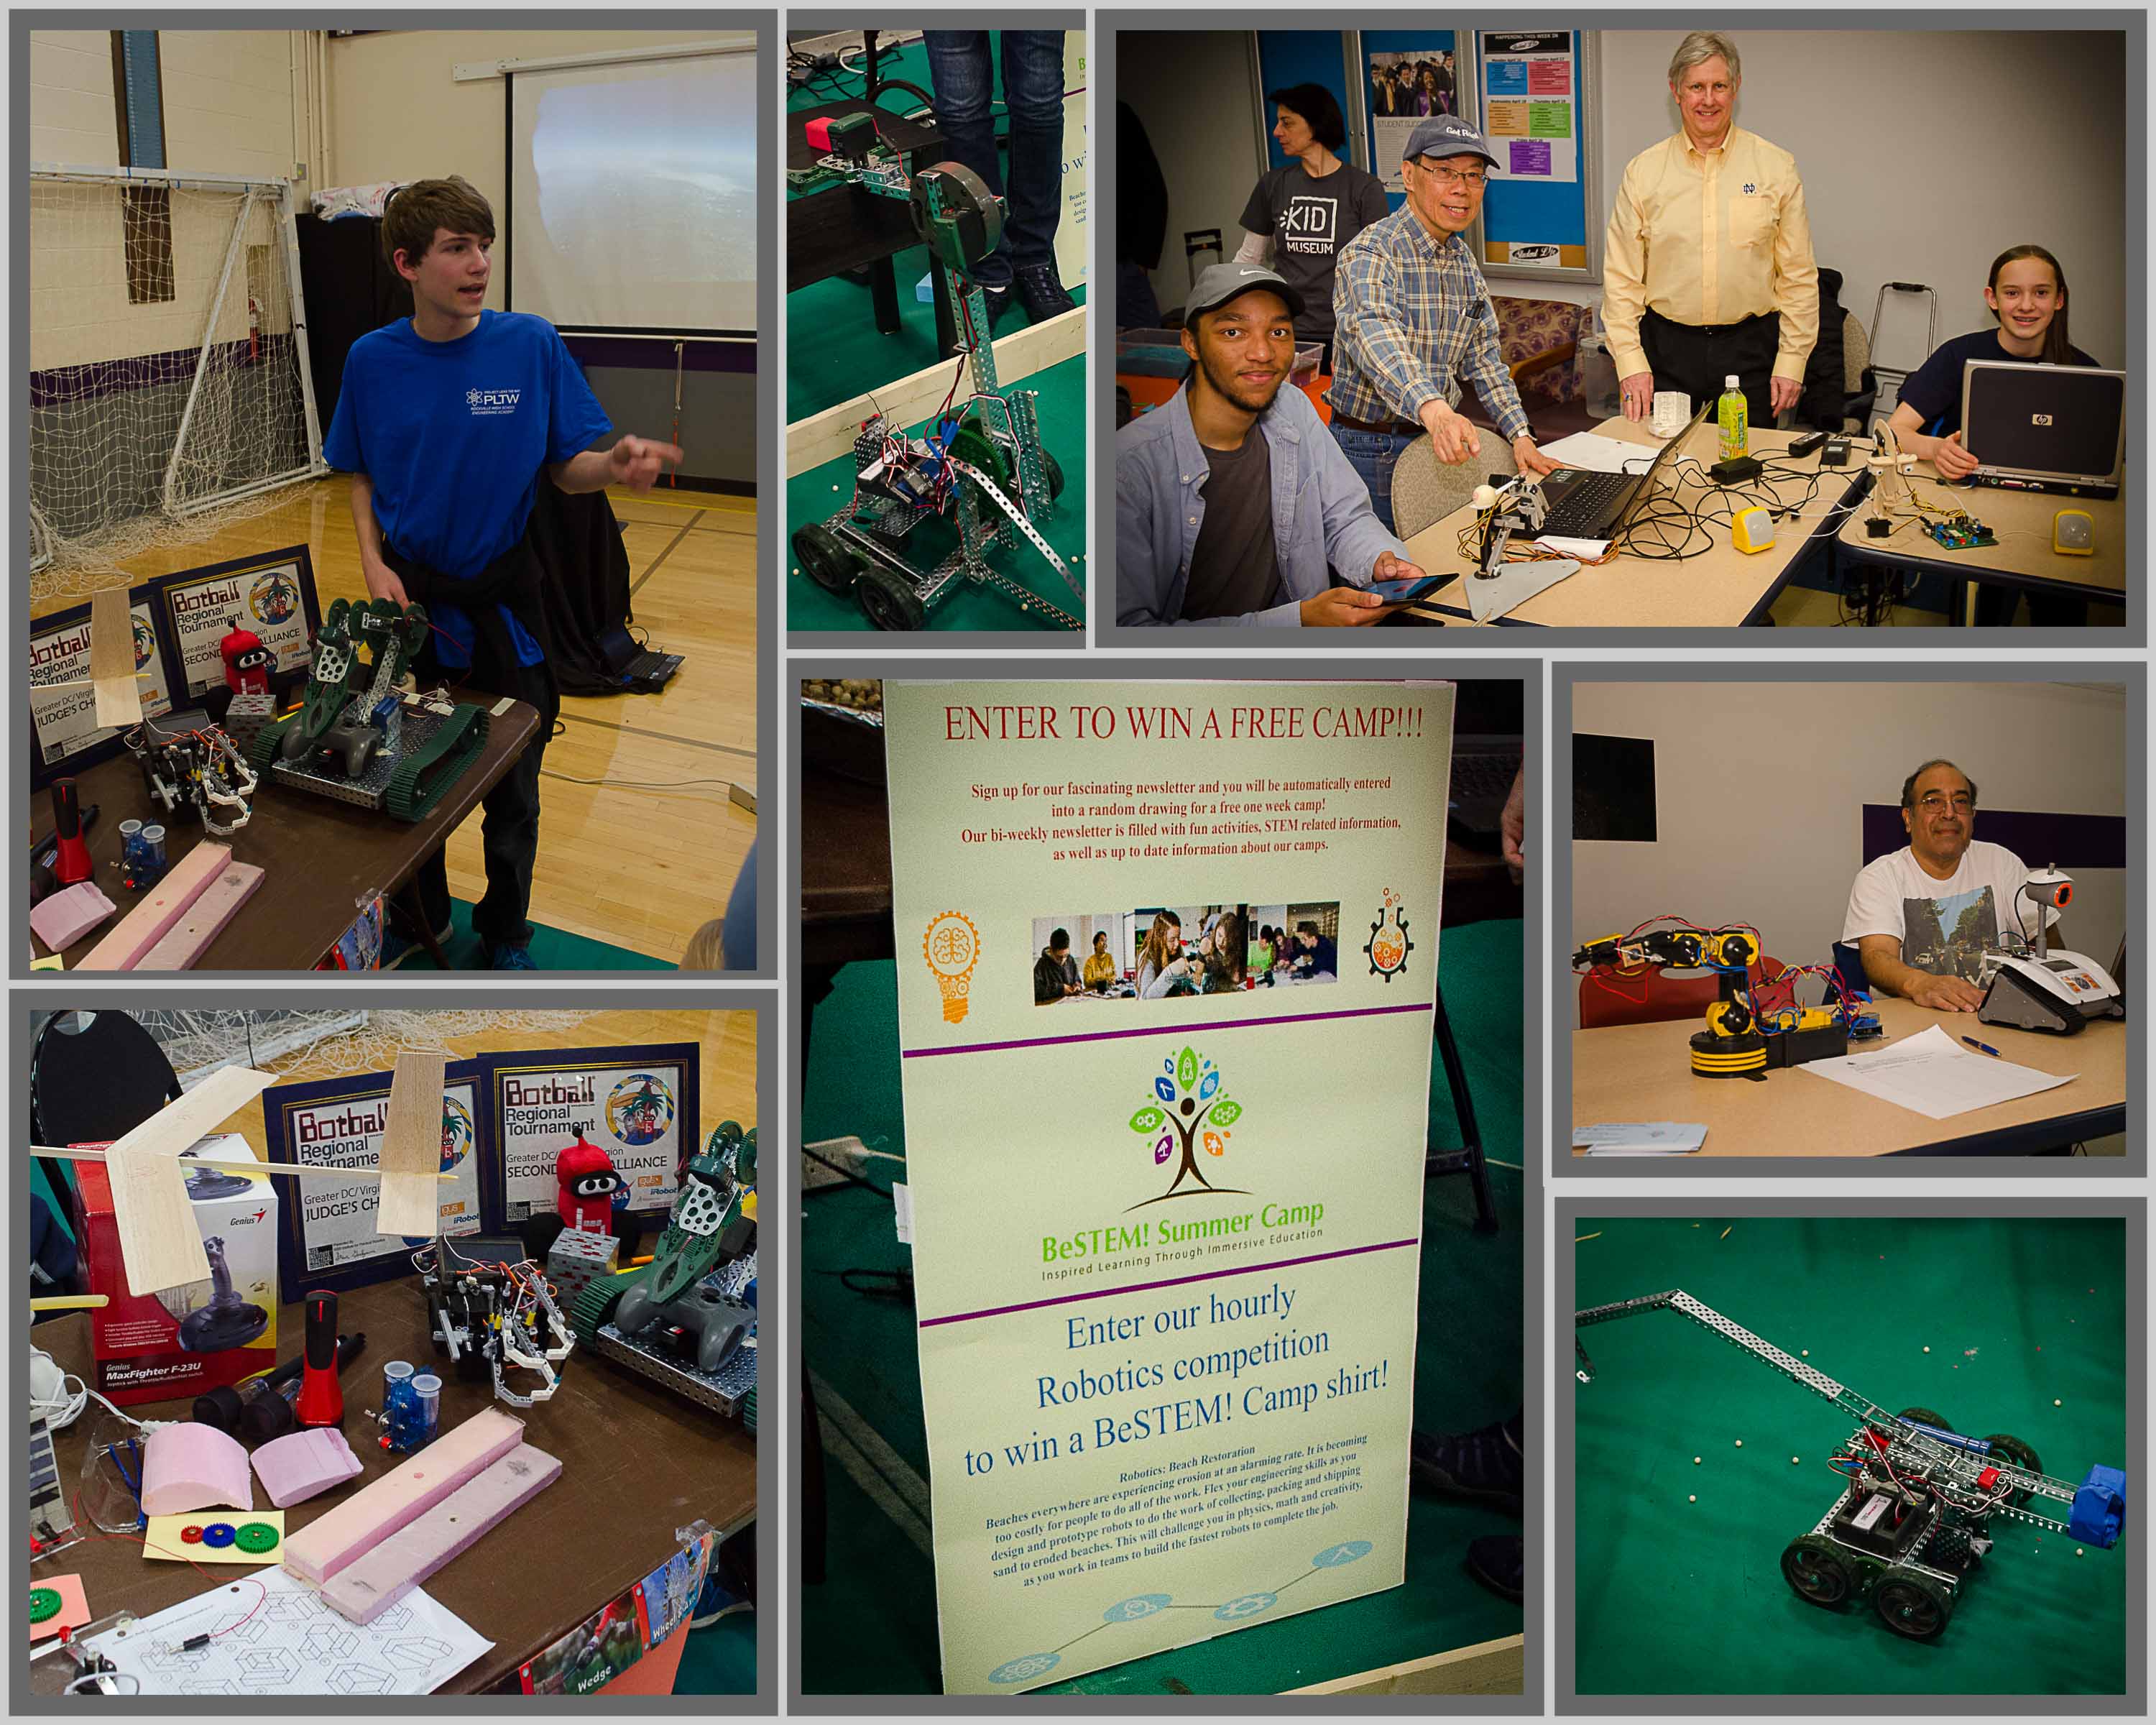 Collage of pictures of promoting and teaching robotics.